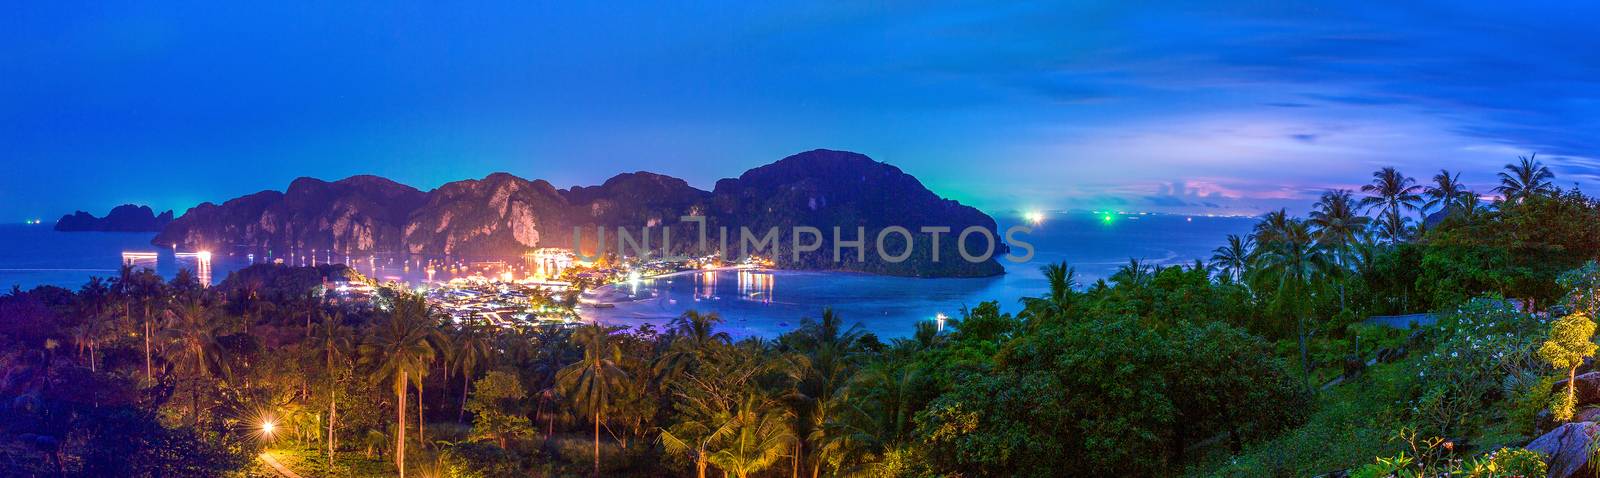 View point of Phi-Phi island, Krabi Province, Thailand by gutarphotoghaphy